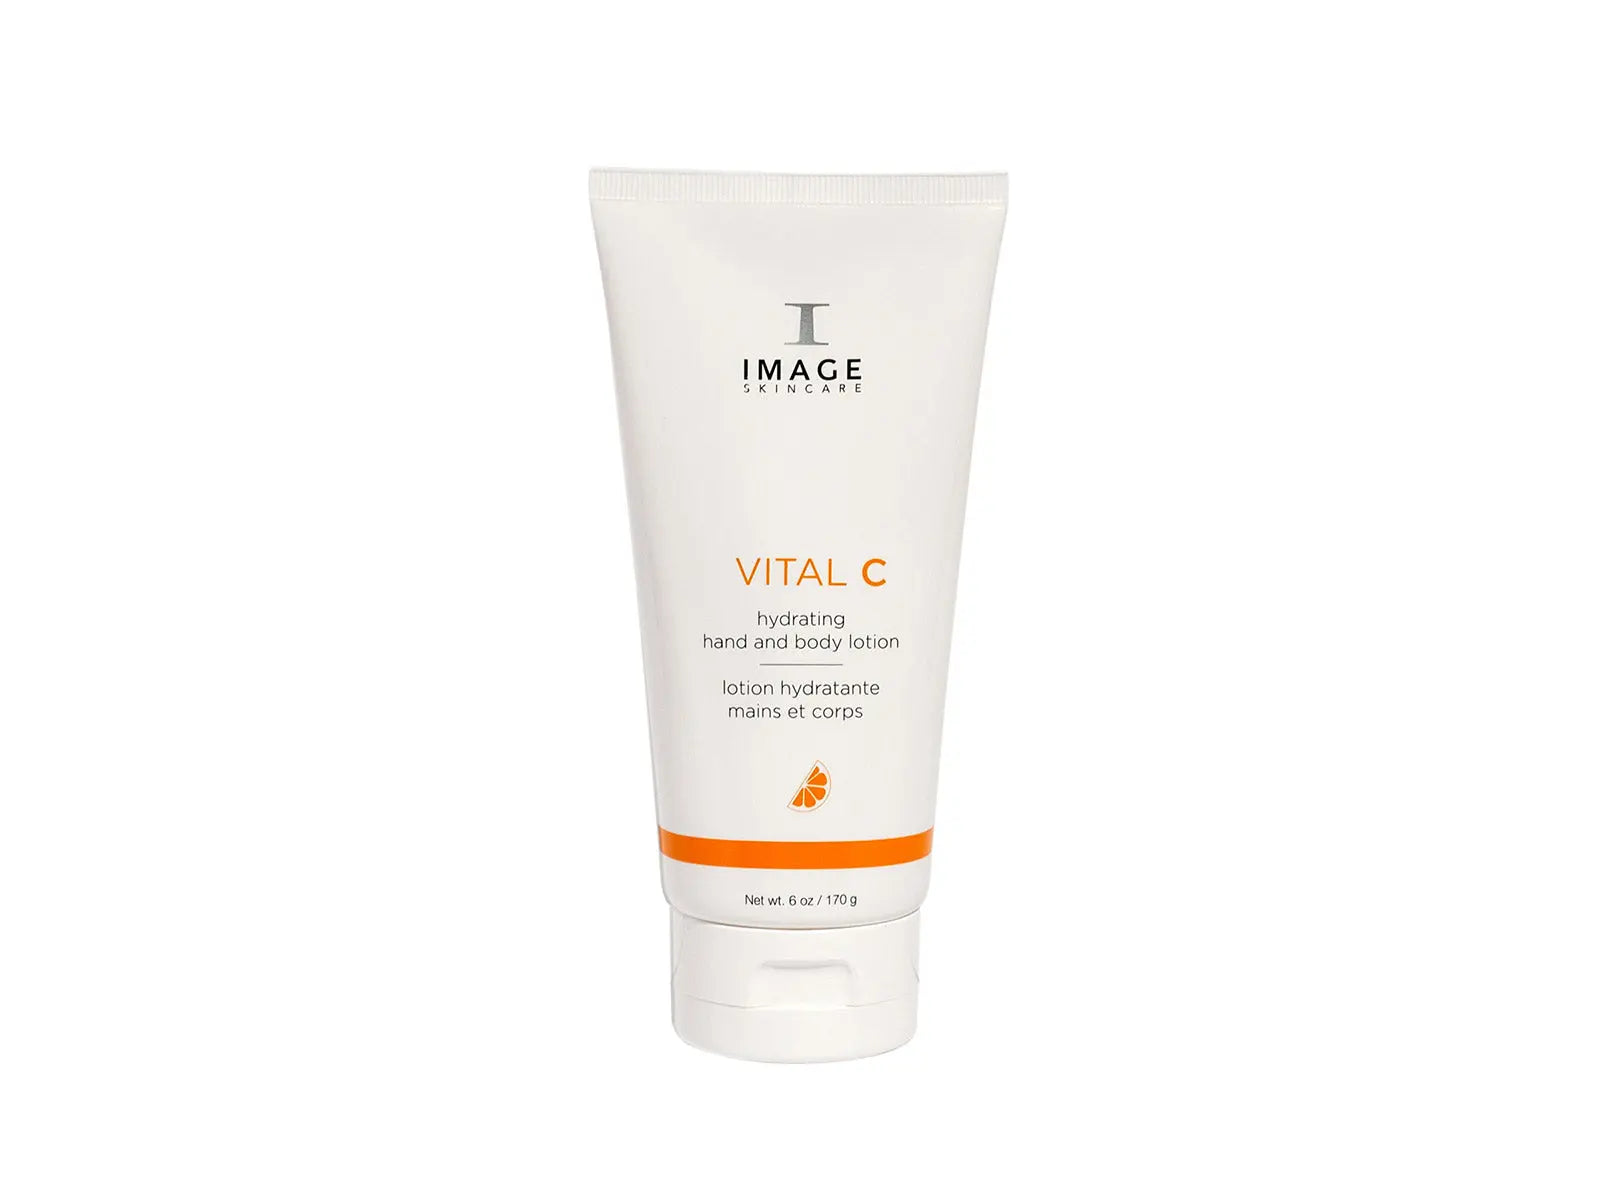 Vital C Hydrating Hand And Body Lotion 170g. IMAGE